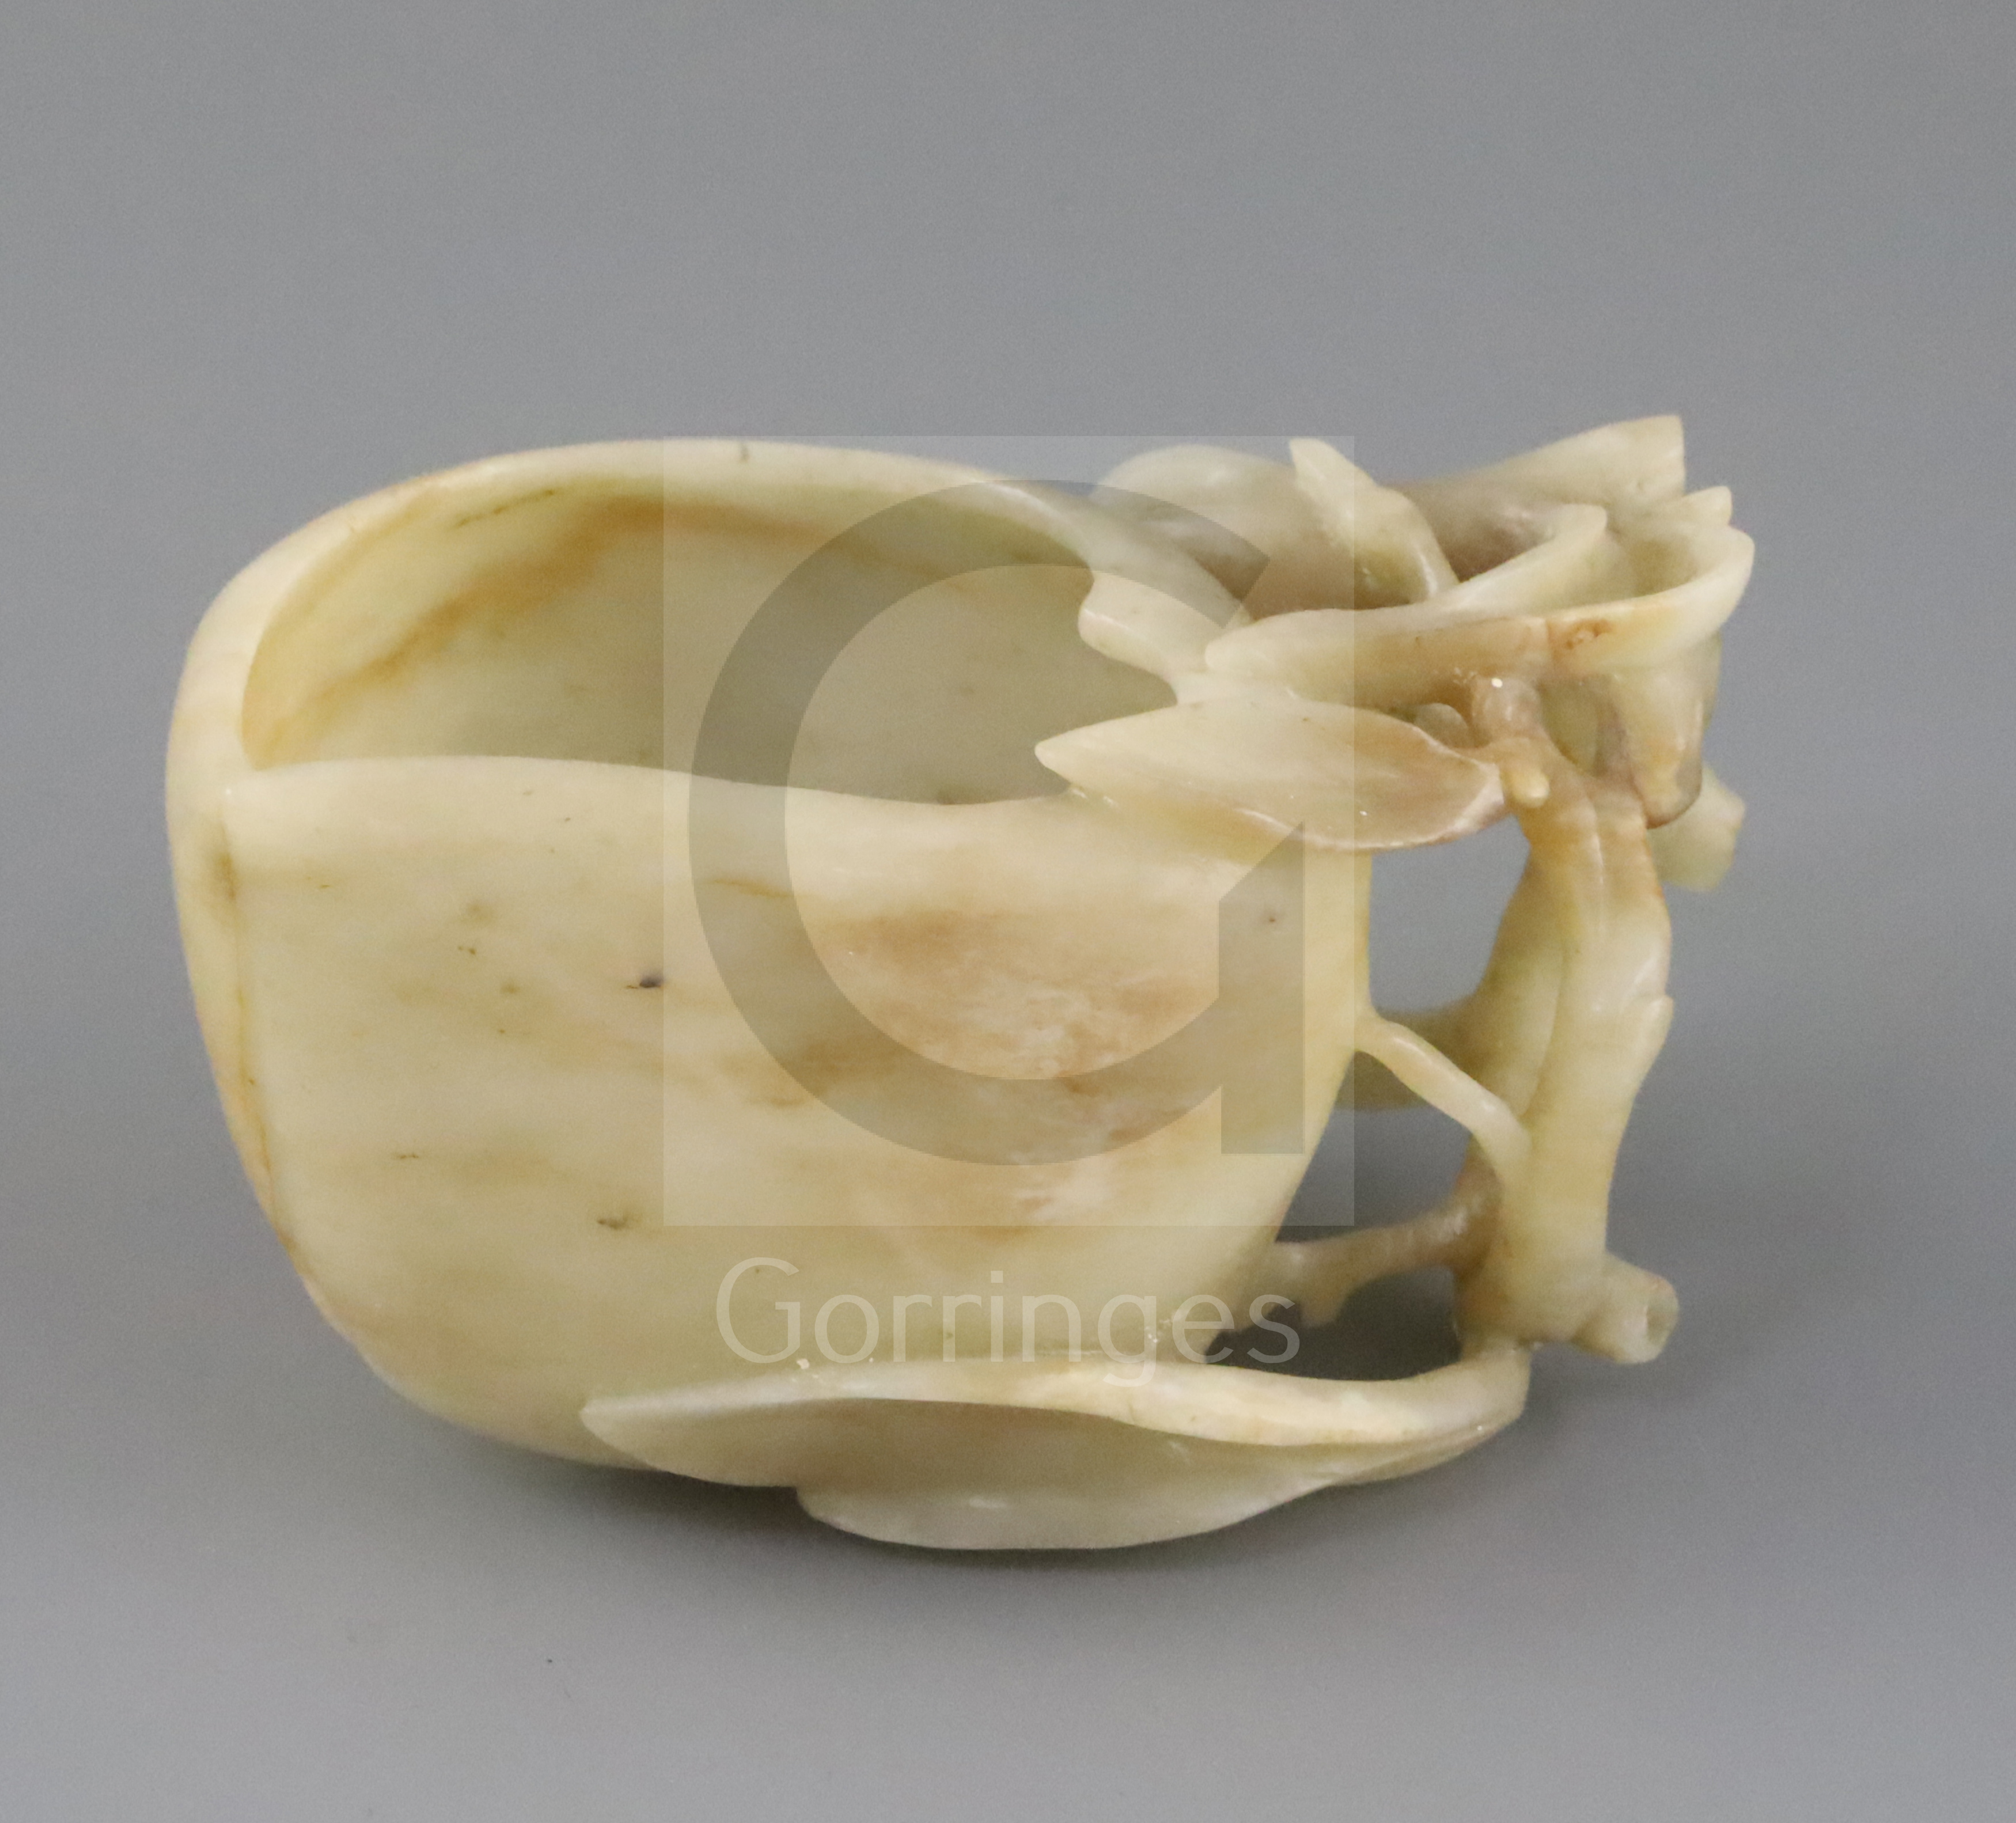 A Chinese jade 'peach' cup, probably 17th / 18th century, the creamy coloured stone with some